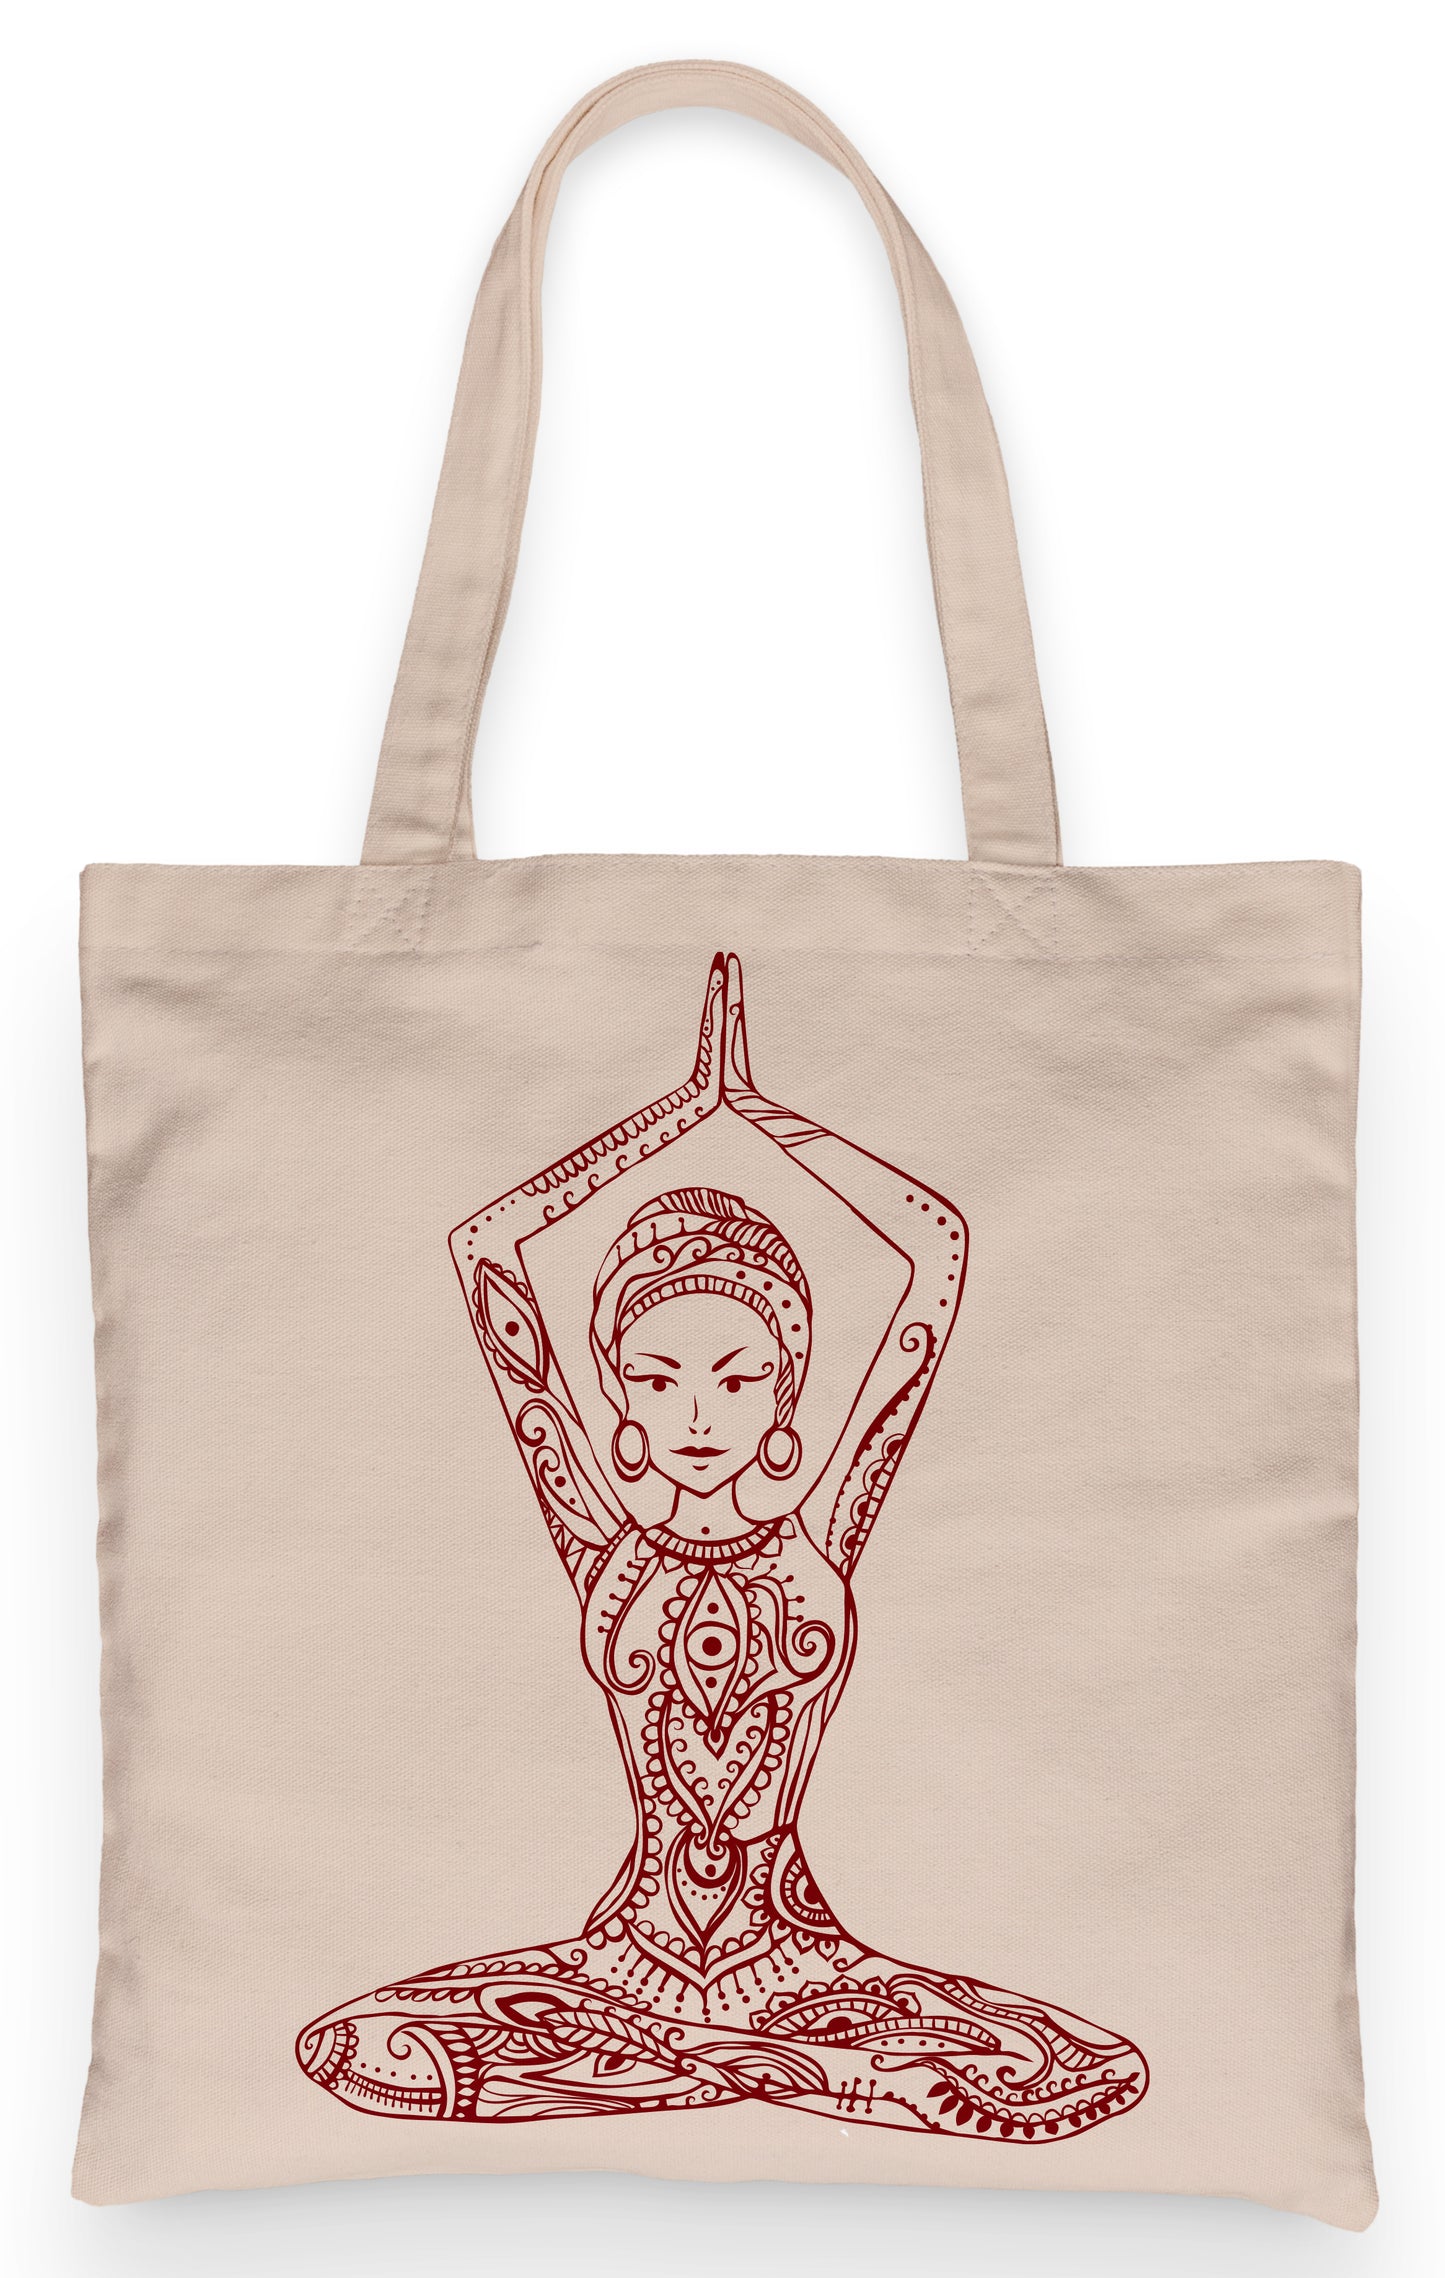 Yoga  Bodhi Tote 100% Cotton Fun Grocery Tote, Book Tote, Office Tote. Premium Cotton Canvas 15.5" by 19.5 " with 5" Gusset on bottom